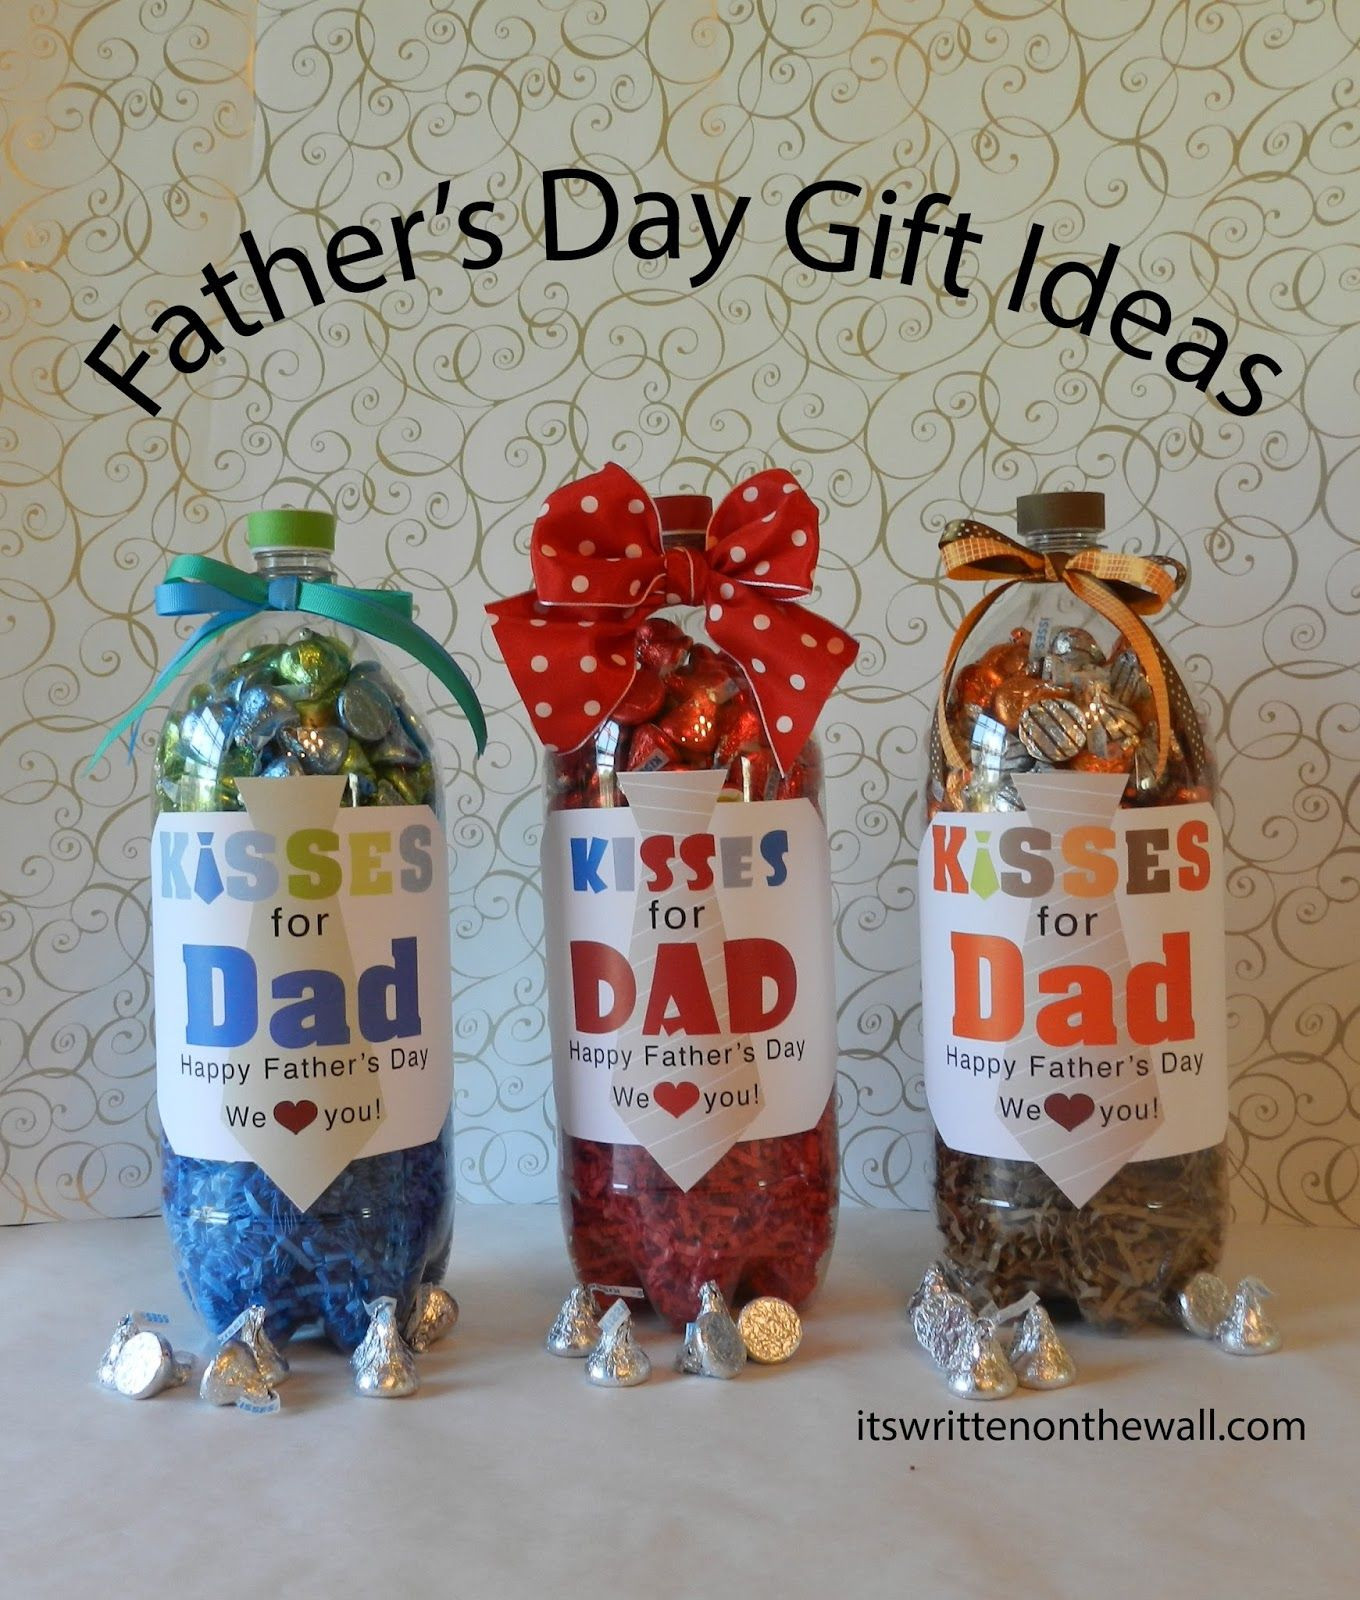 Top 22 Great Gift Ideas for Fathers – Home, Family, Style and Art Ideas